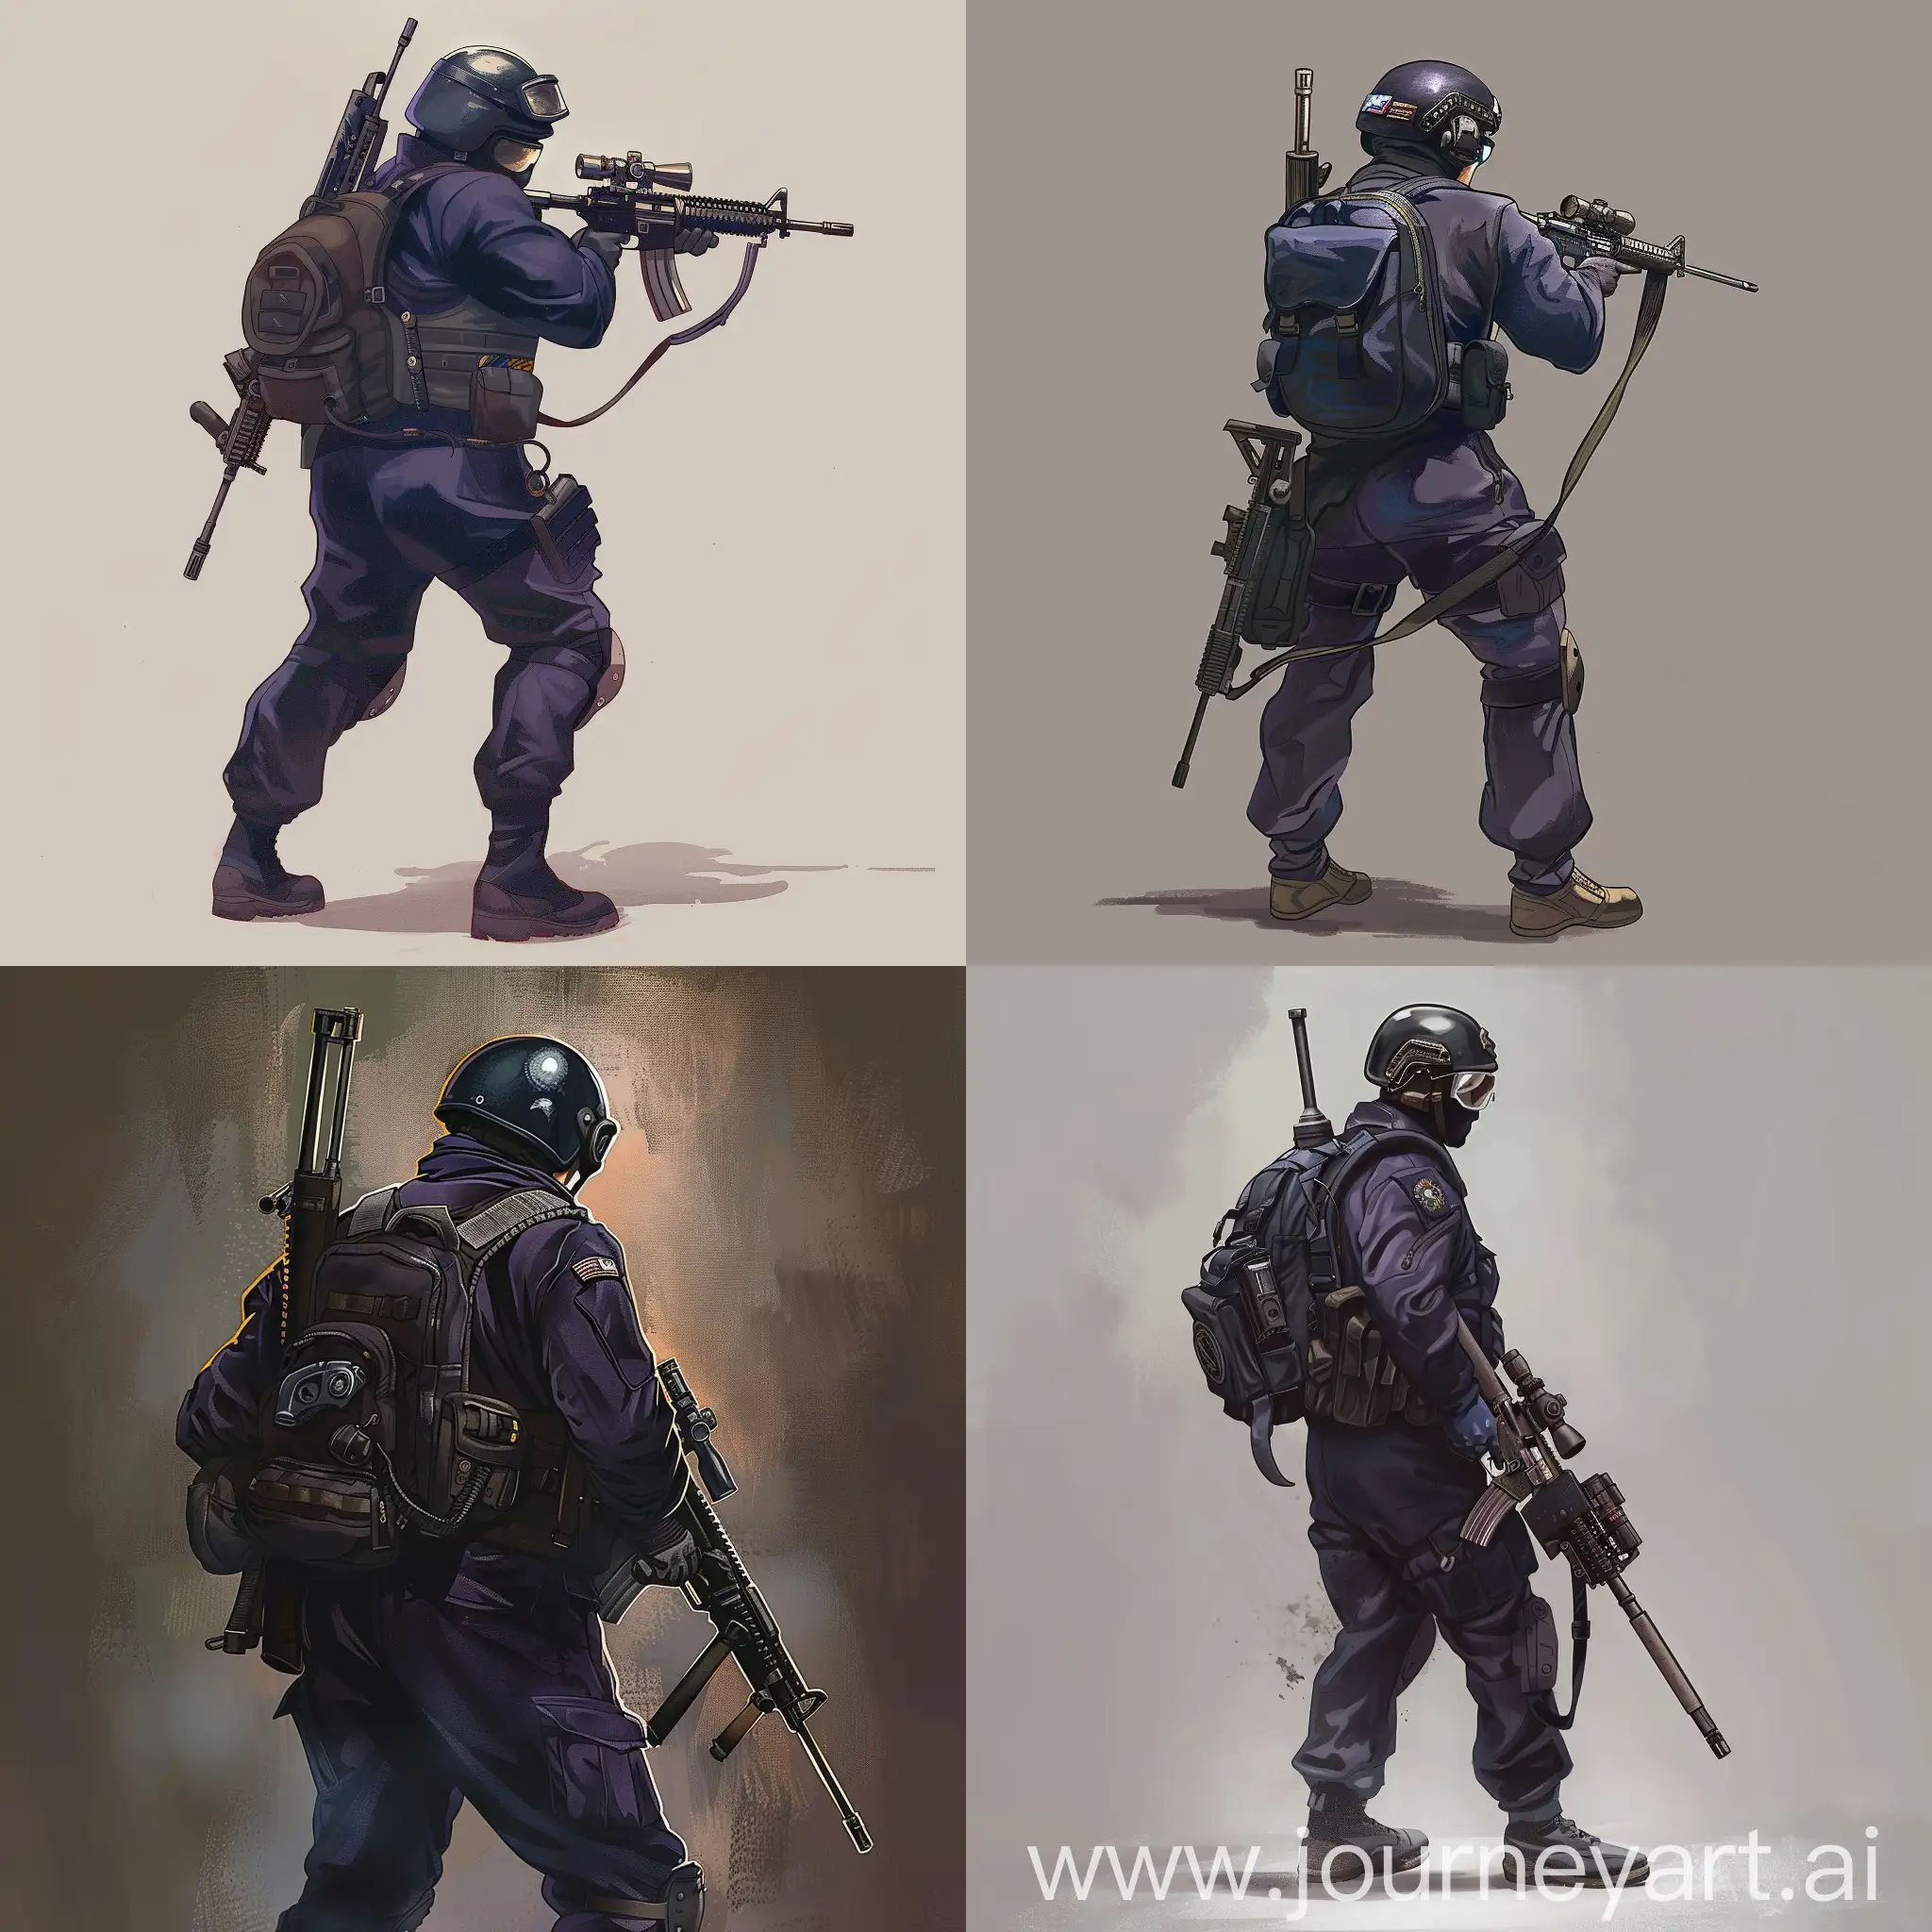 Concept character art, dark purple military jumpsuit, small military backpack, military unloading on his body, sniper rifle in his hands.